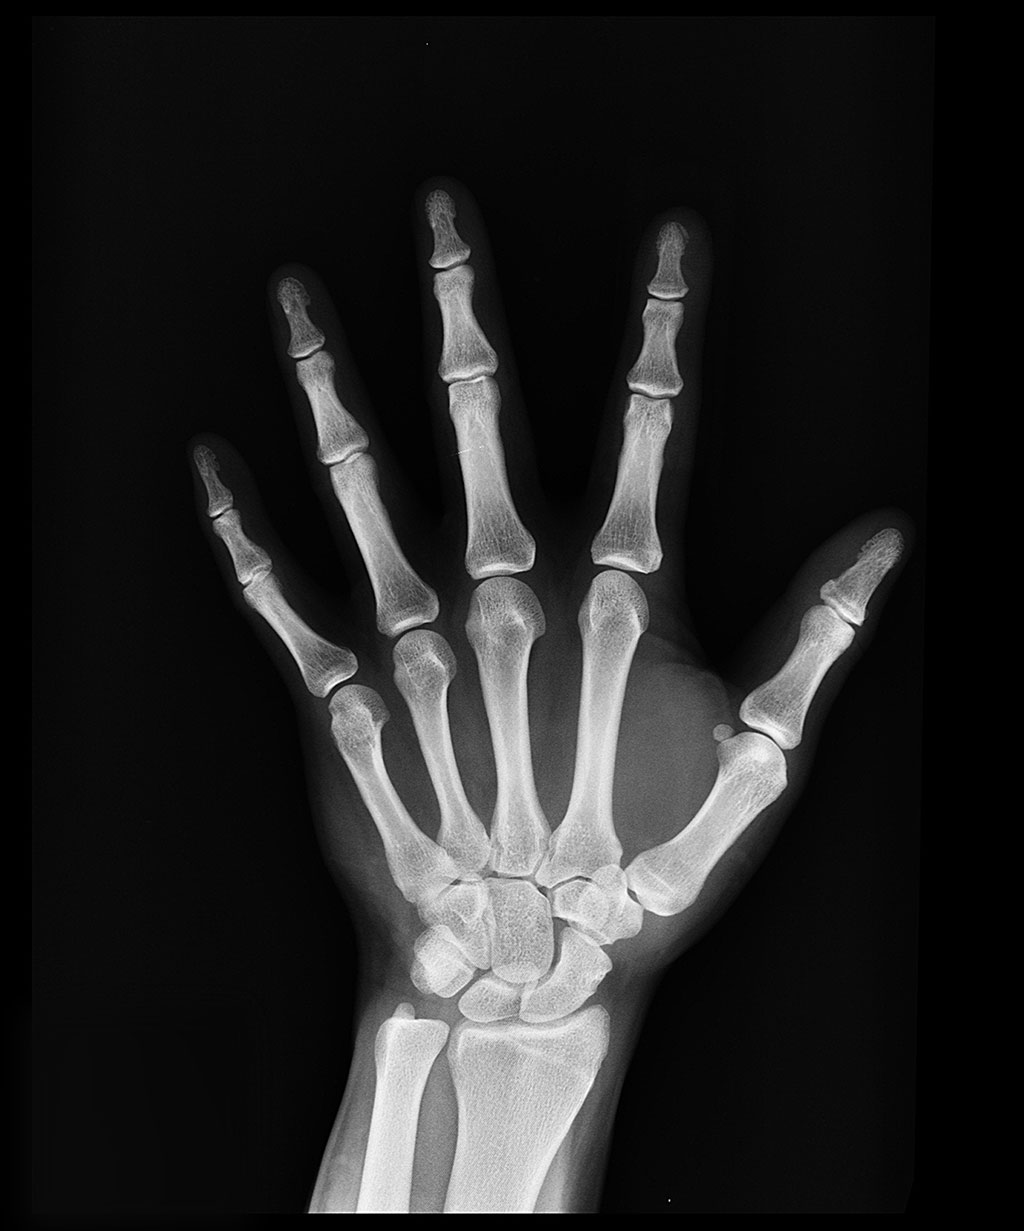 Image: RBfracture can automatically identify fractures on X-rays within seconds (Photo courtesy of Pexels)